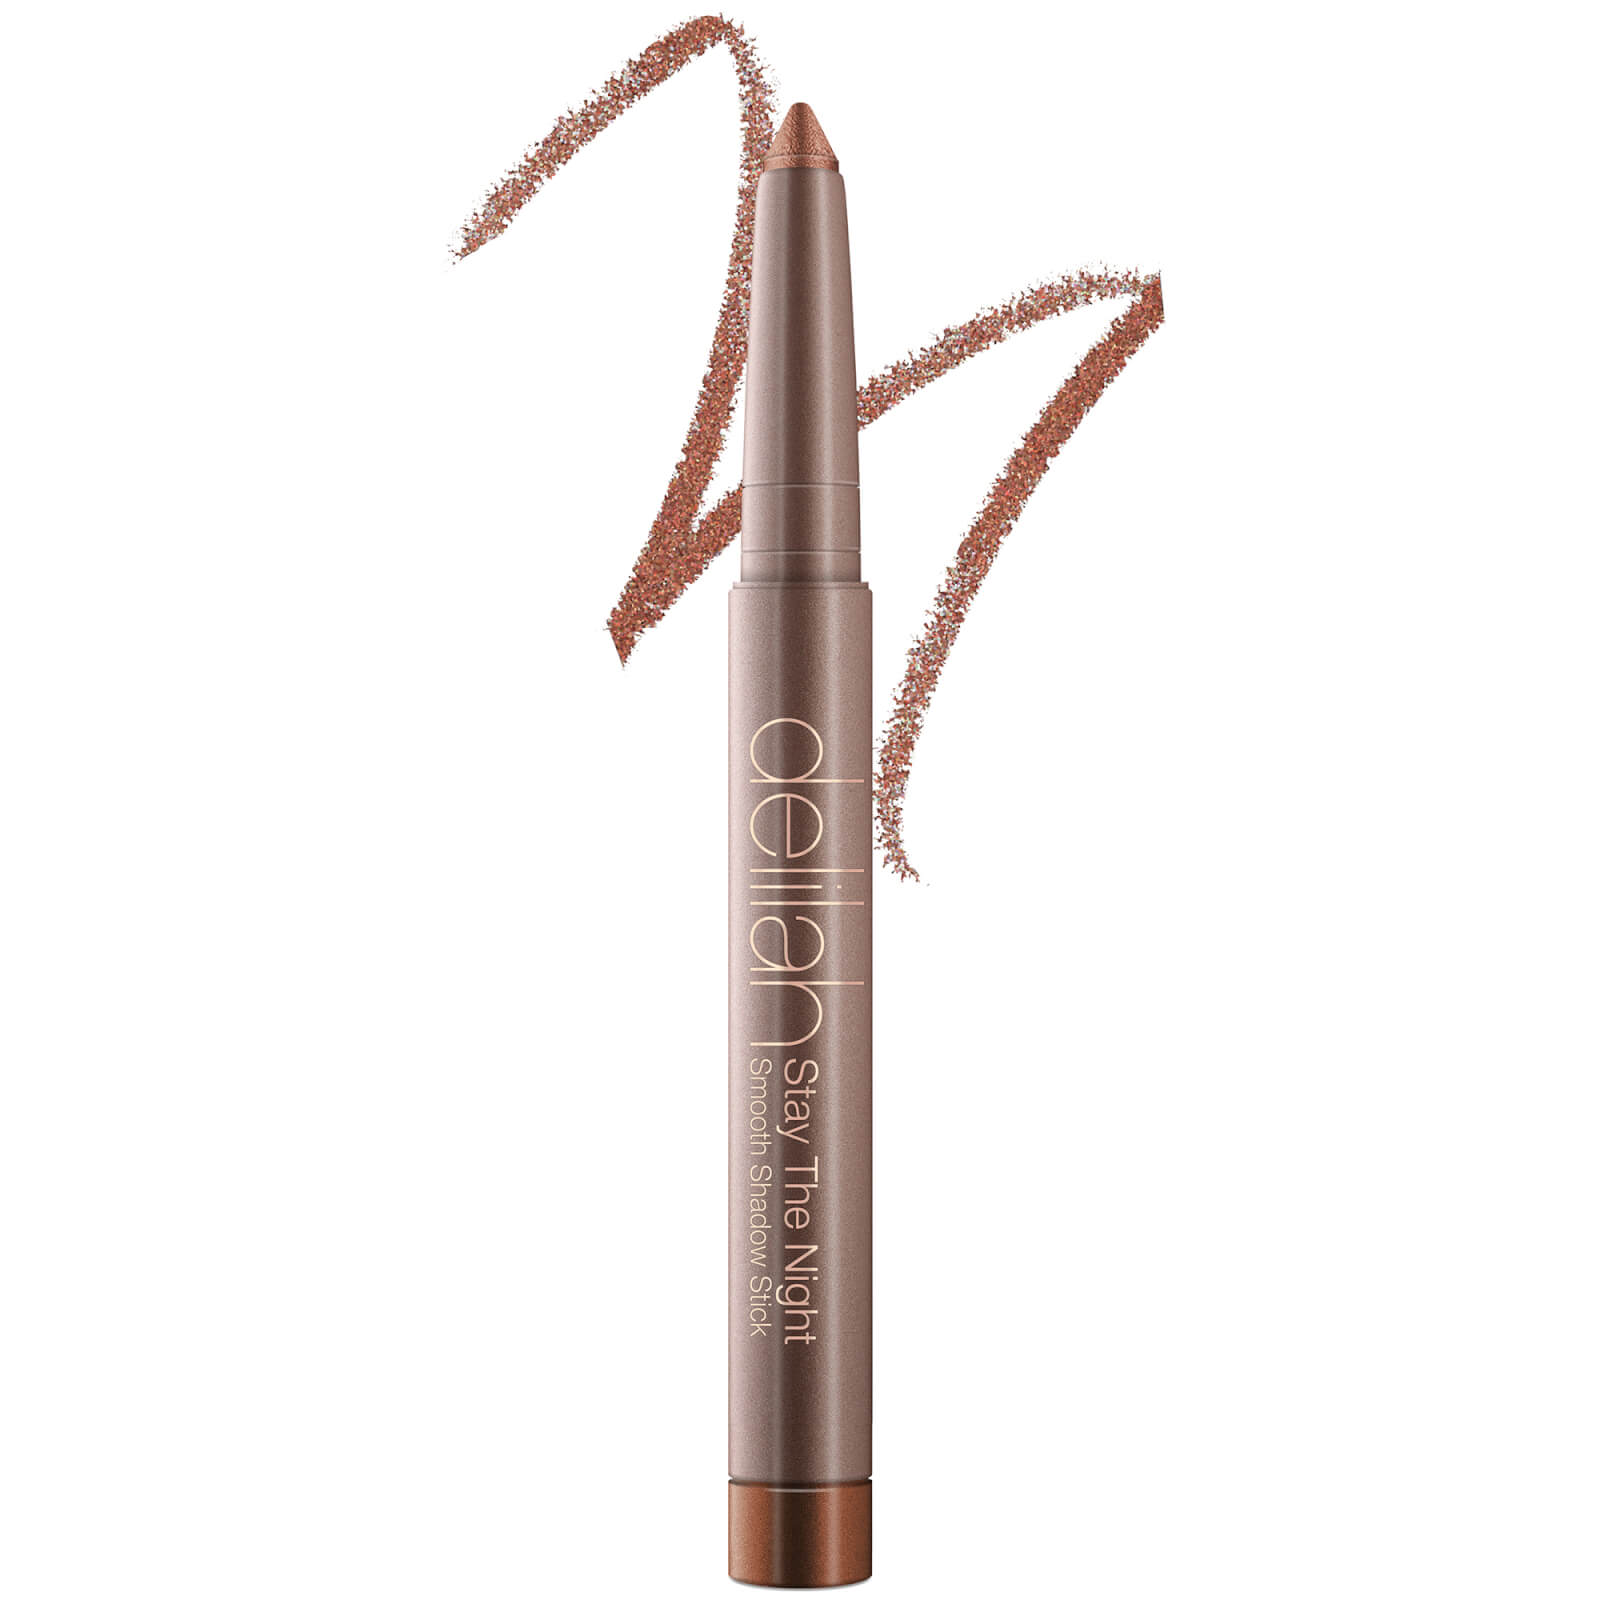 Delilah Stay The Night Smooth Shadow Stick 16g (Various Shades) - Cinnamon Swirl